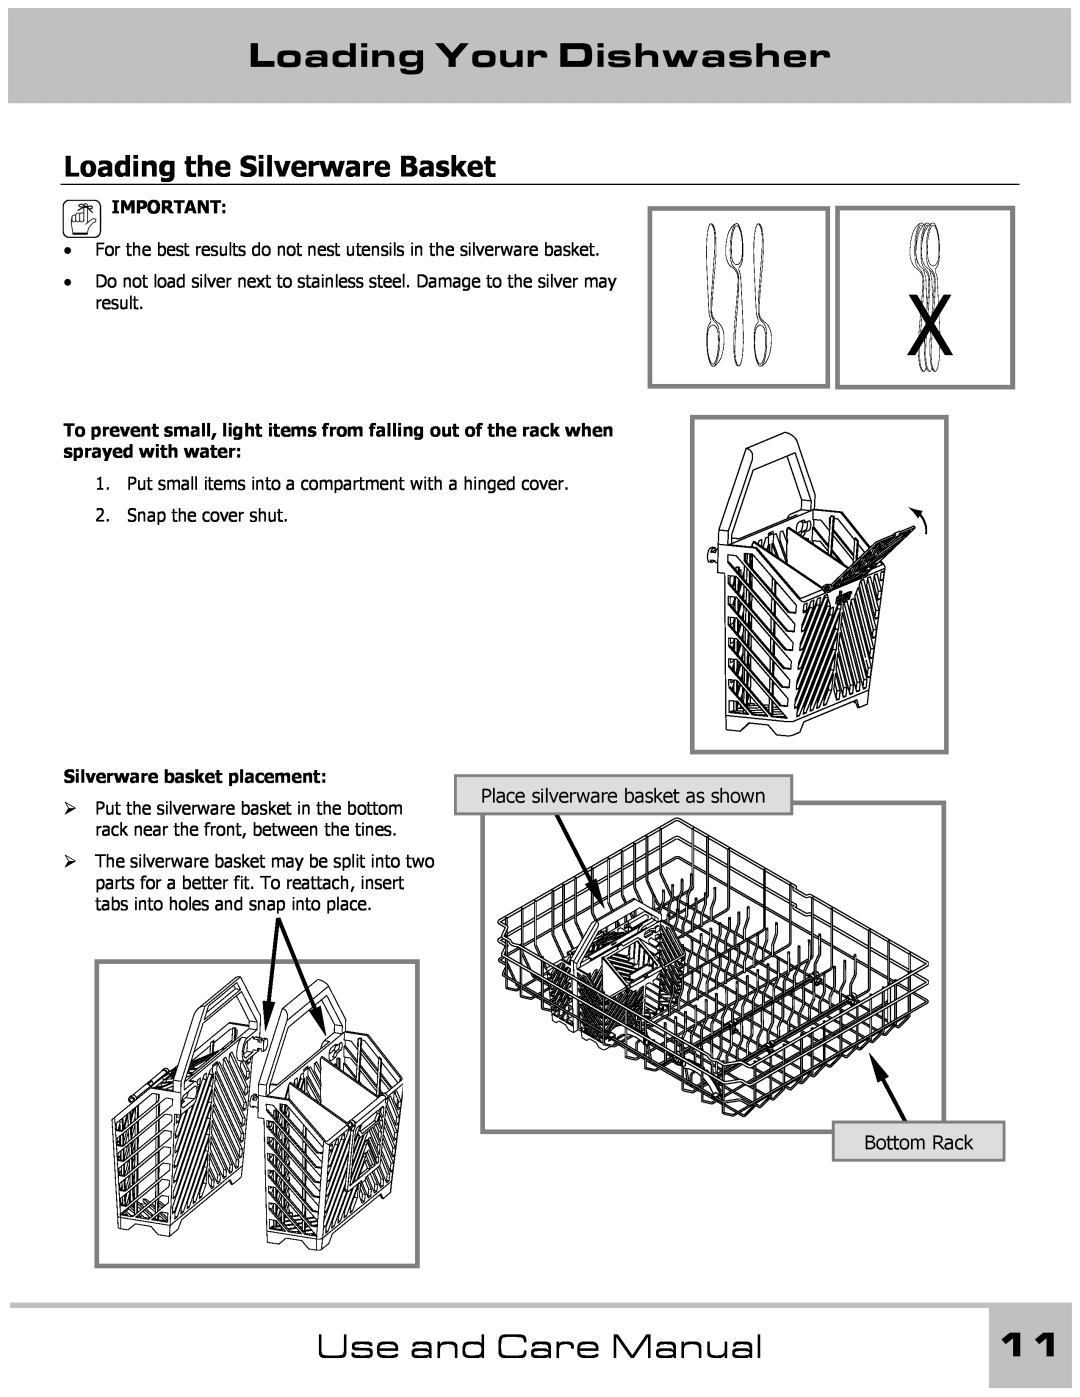 Dacor 65537 Loading the Silverware Basket, Place silverware basket as shown, Loading Your Dishwasher, Use and Care Manual 